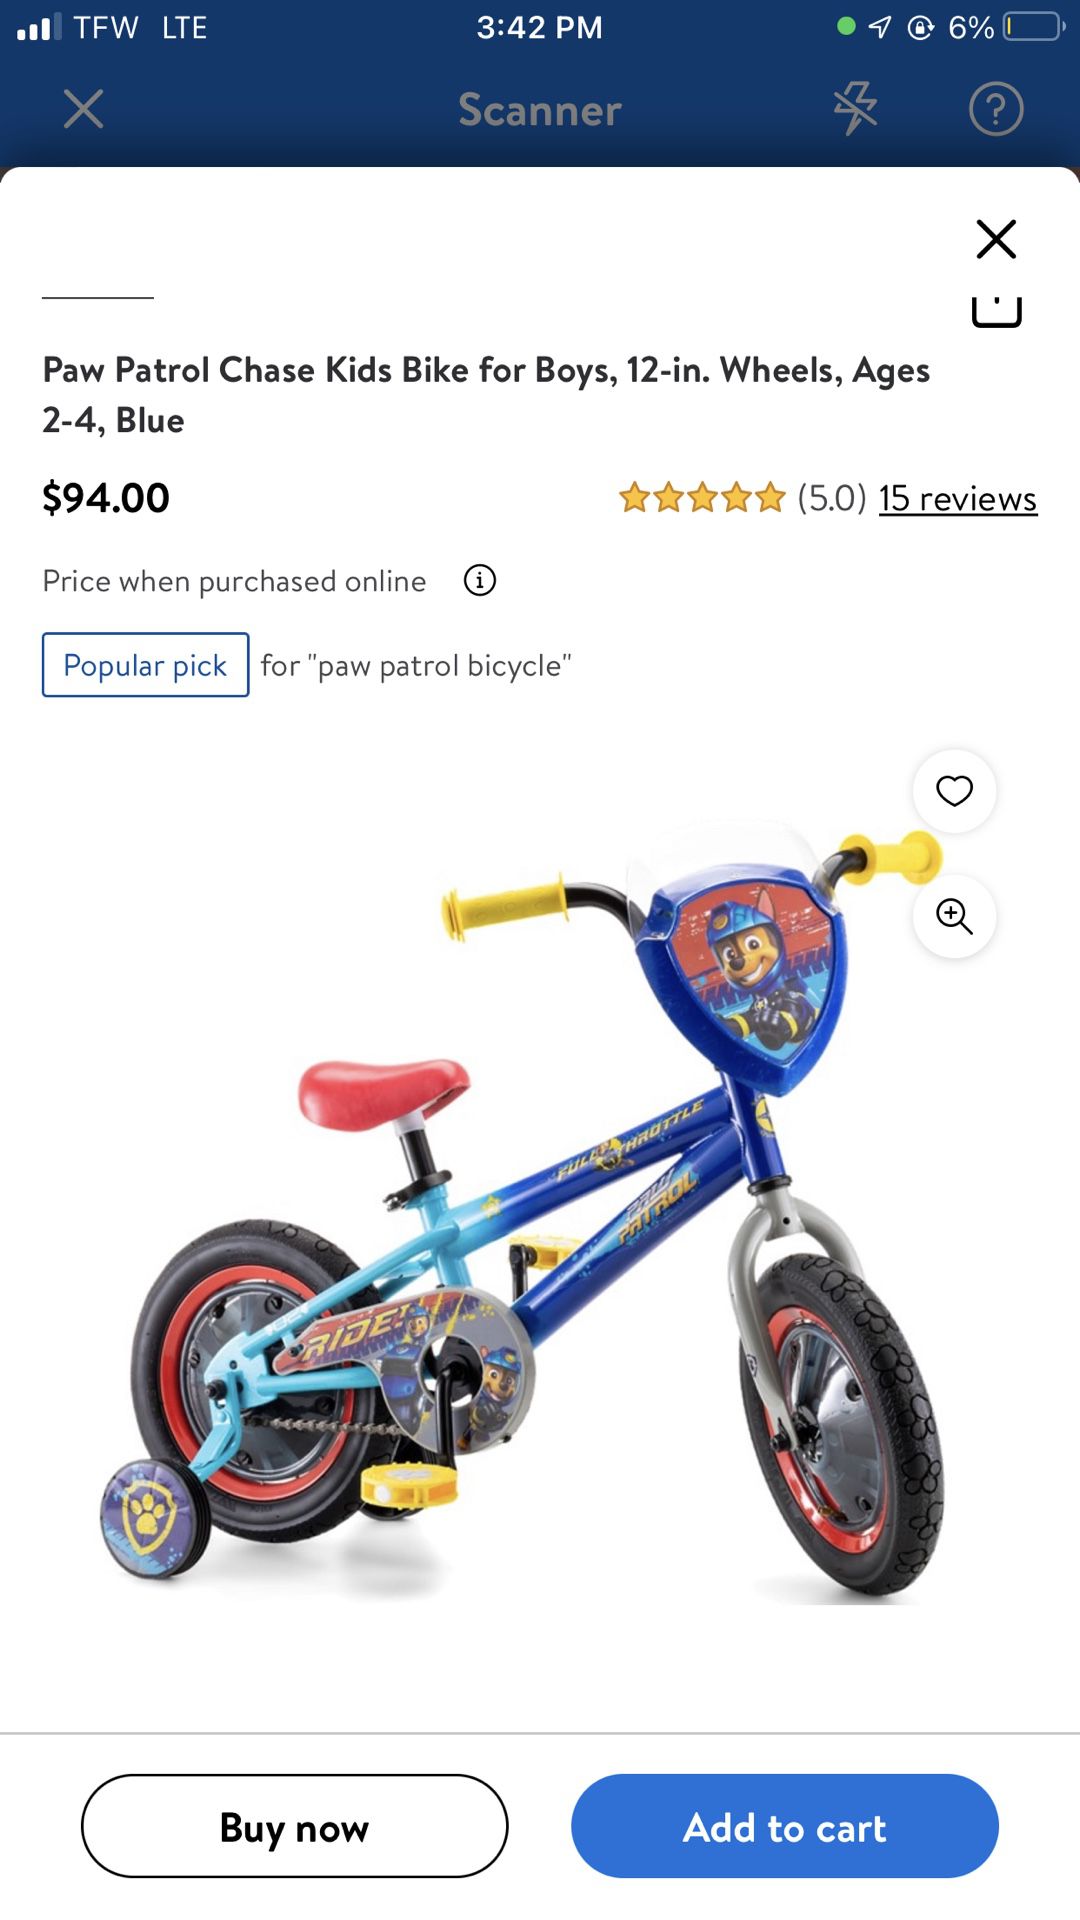 Paw patrol chase kids bike for boys, 12-in wheels, Ages 2-4 Blue